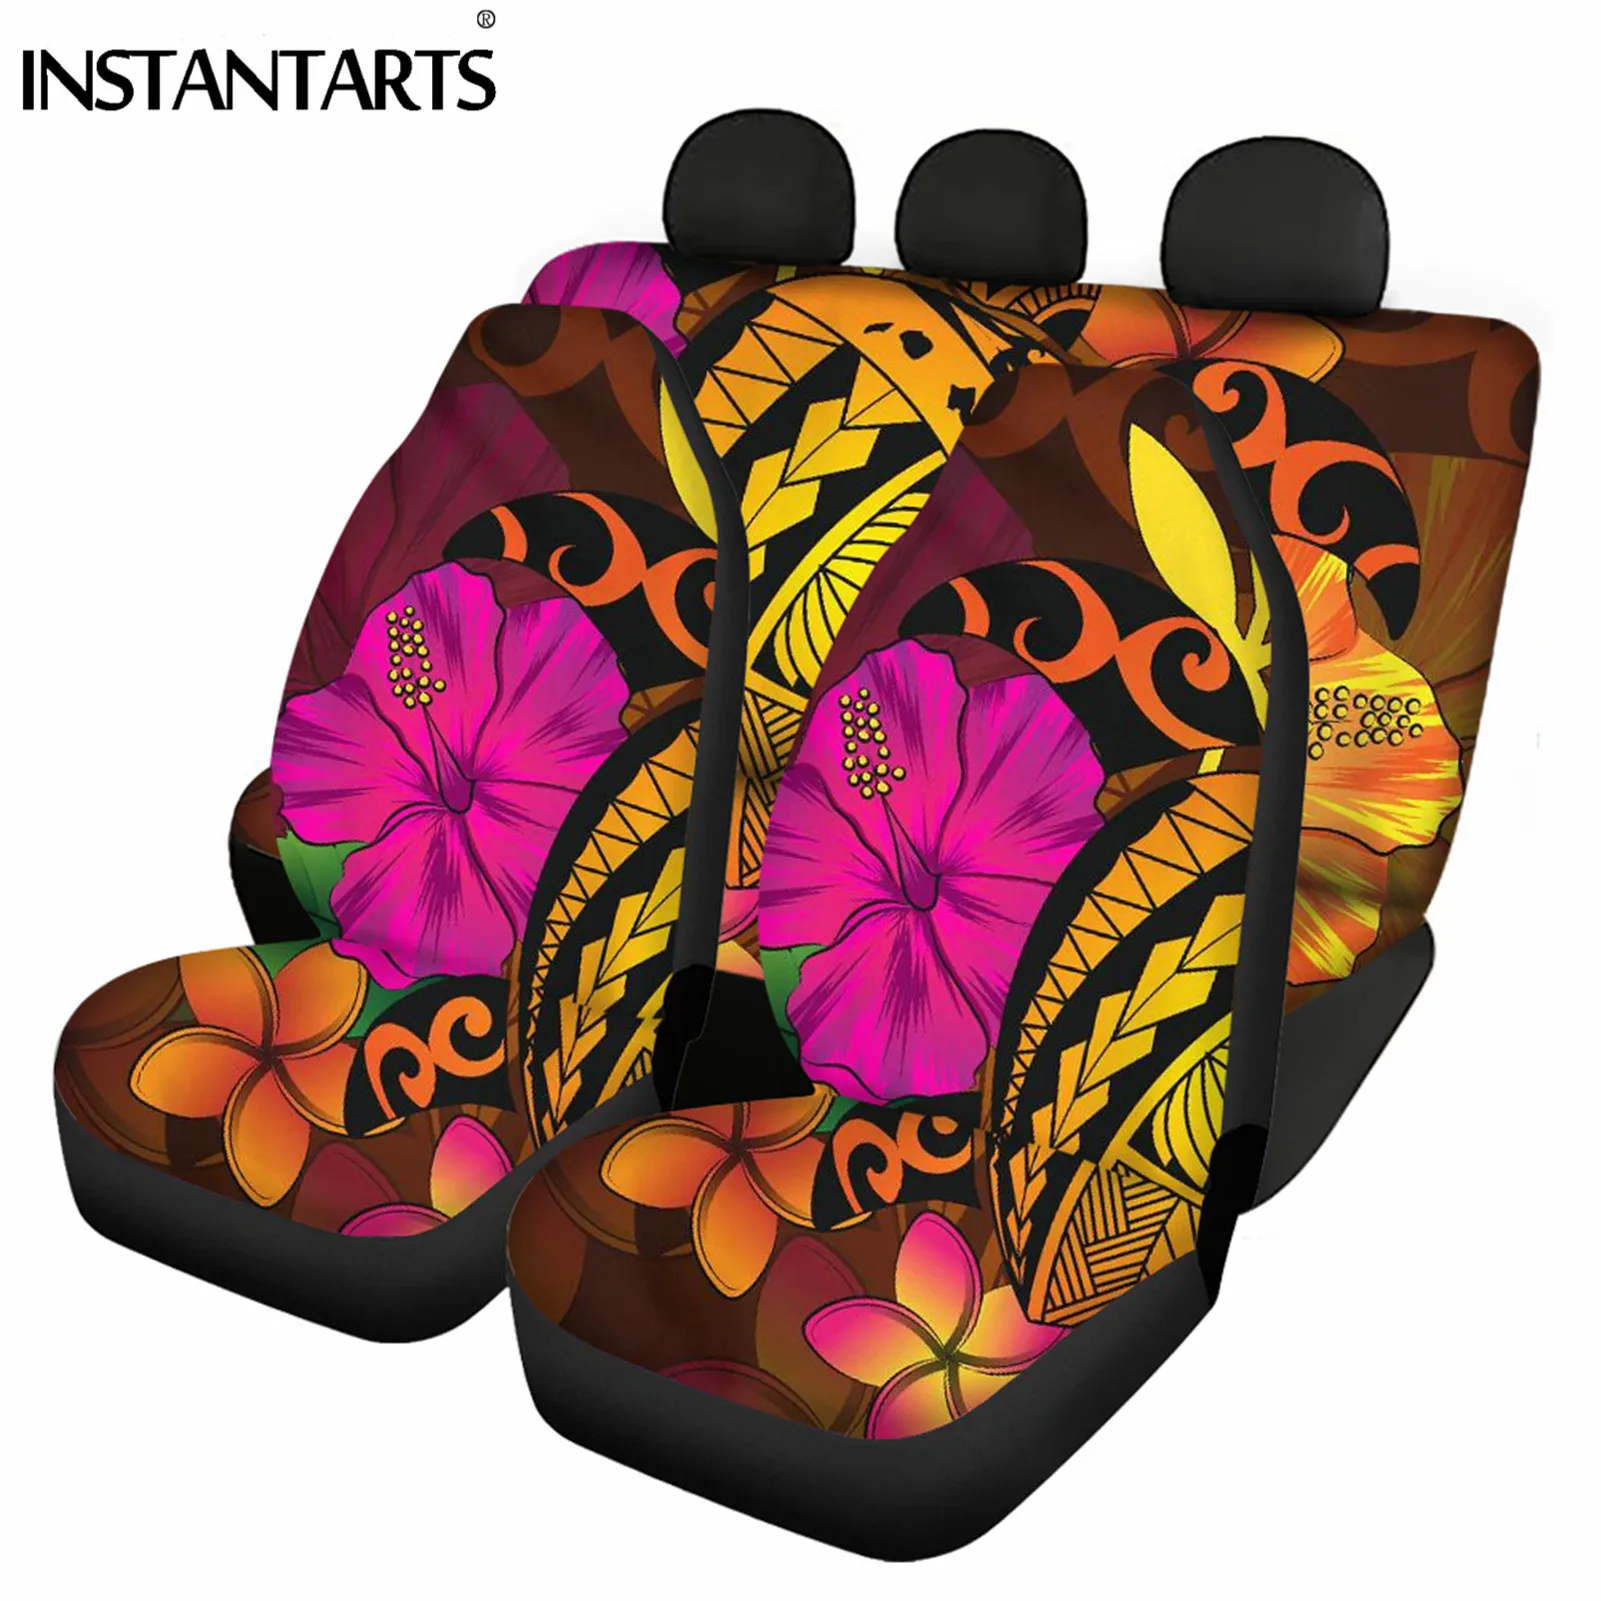 

INSTANTARTS Polynesian Hawaiian Plumeria Flower Print Car Seat Cover Breathable Automobile Seats Protector fit Most Cars Stylish